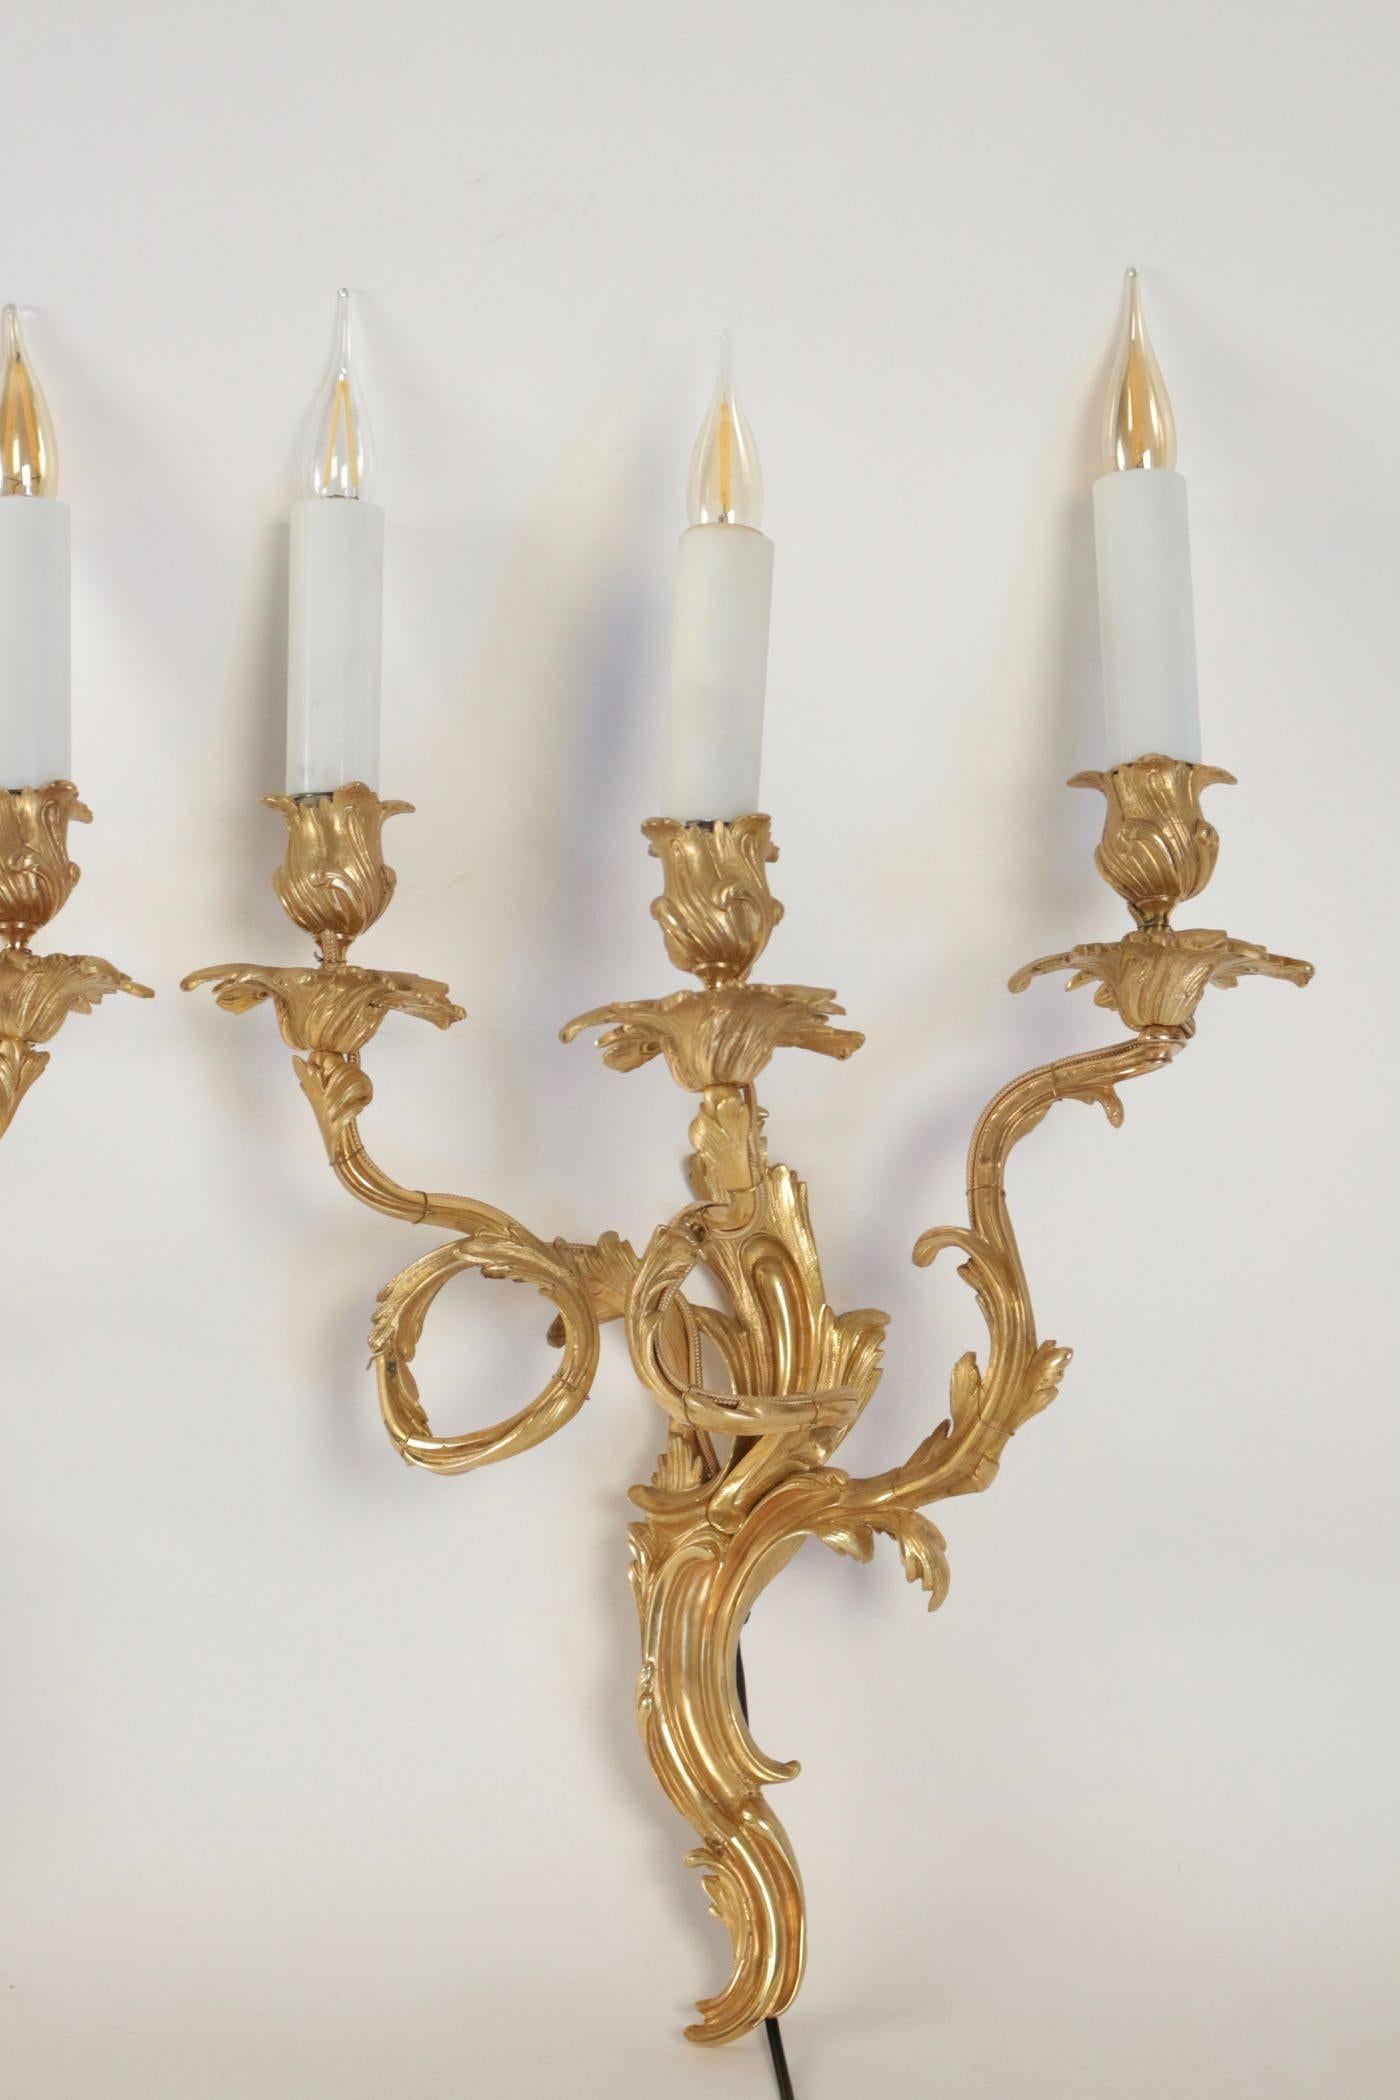 Pair of sconces in gold gilt bronze Louis XV style, 19th century. Candlesticks in opaline. Three lights. Measures: H 51cm, L 33cm, P 21cm.

 